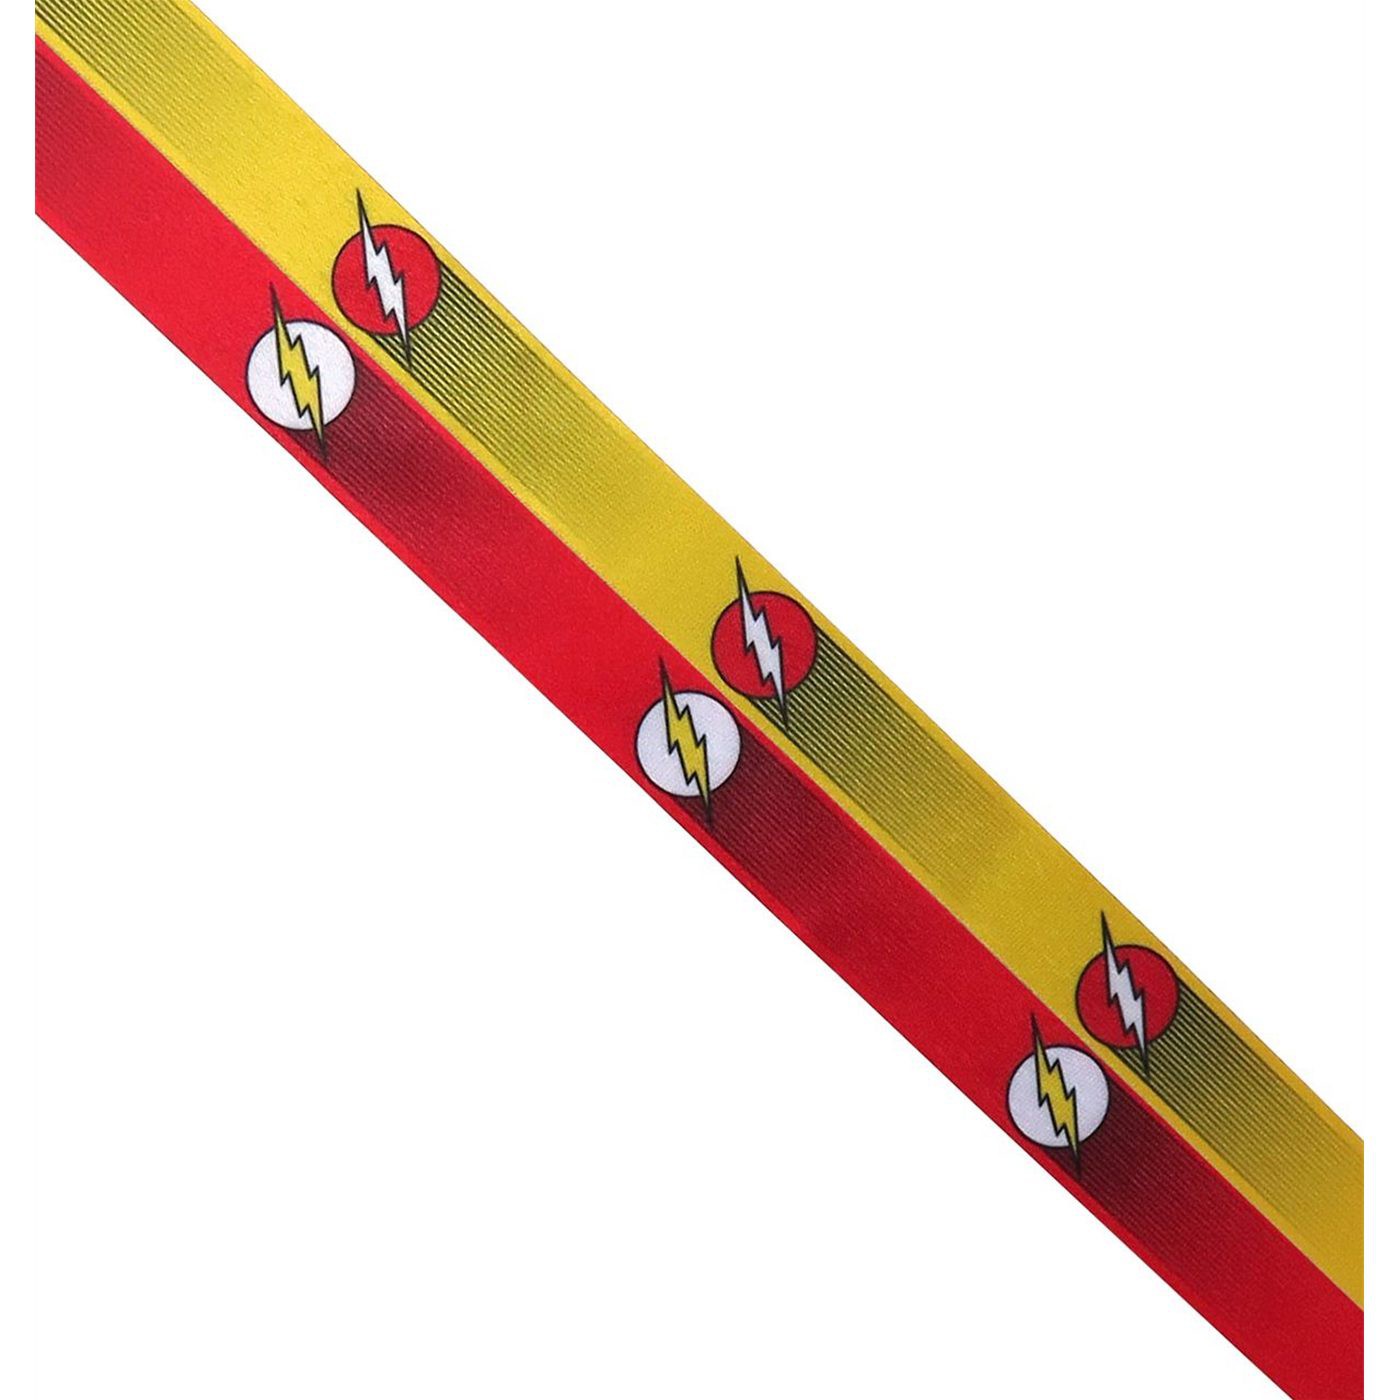 Flash Red and Yellow Logo Lanyard with PVC Charm